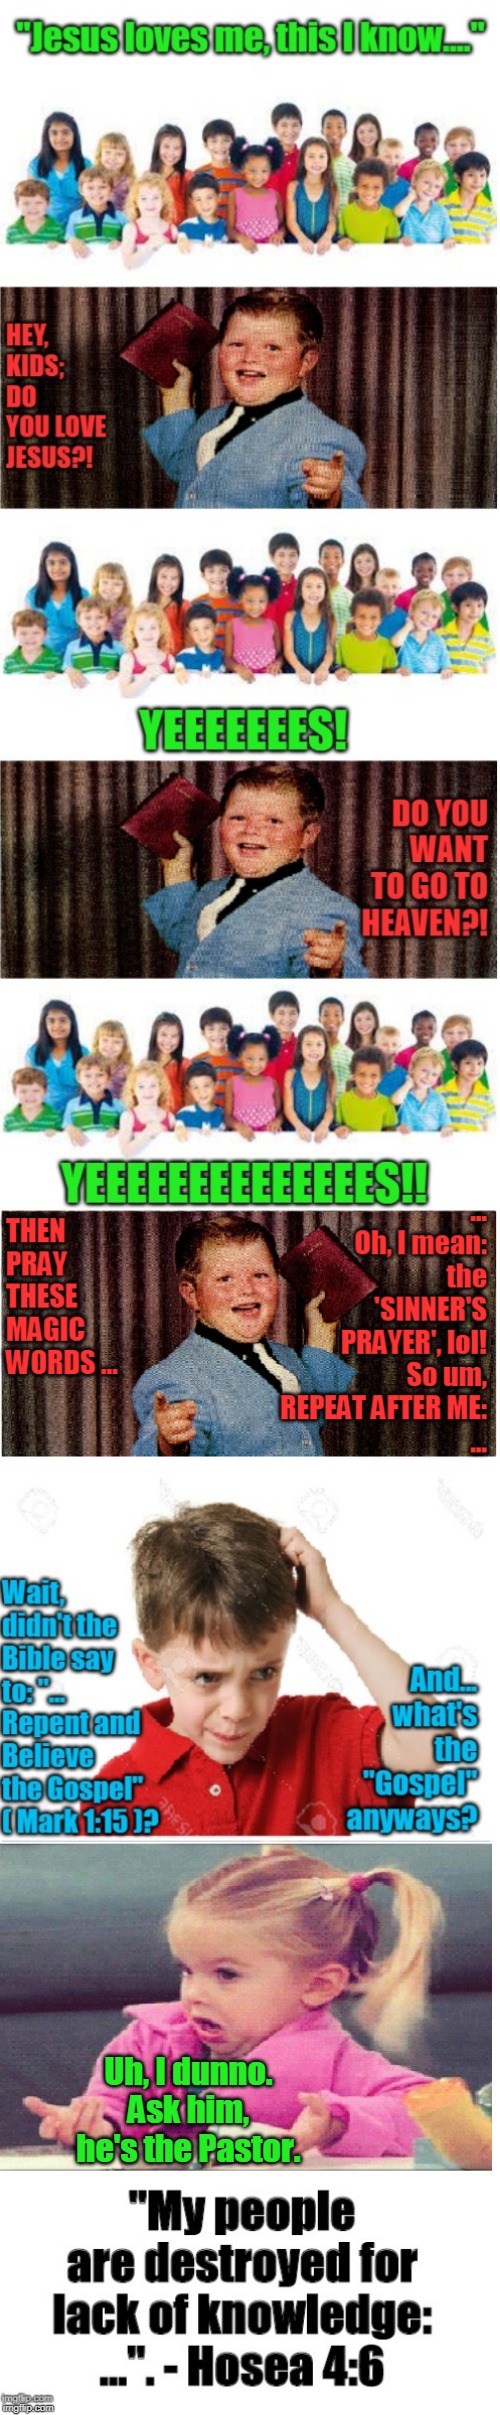 The Sinner's Prayer! | Uh, I dunno. Ask him, he's the Pastor. | image tagged in christian,christians,christianity,church,bible verse,scriptures | made w/ Imgflip meme maker